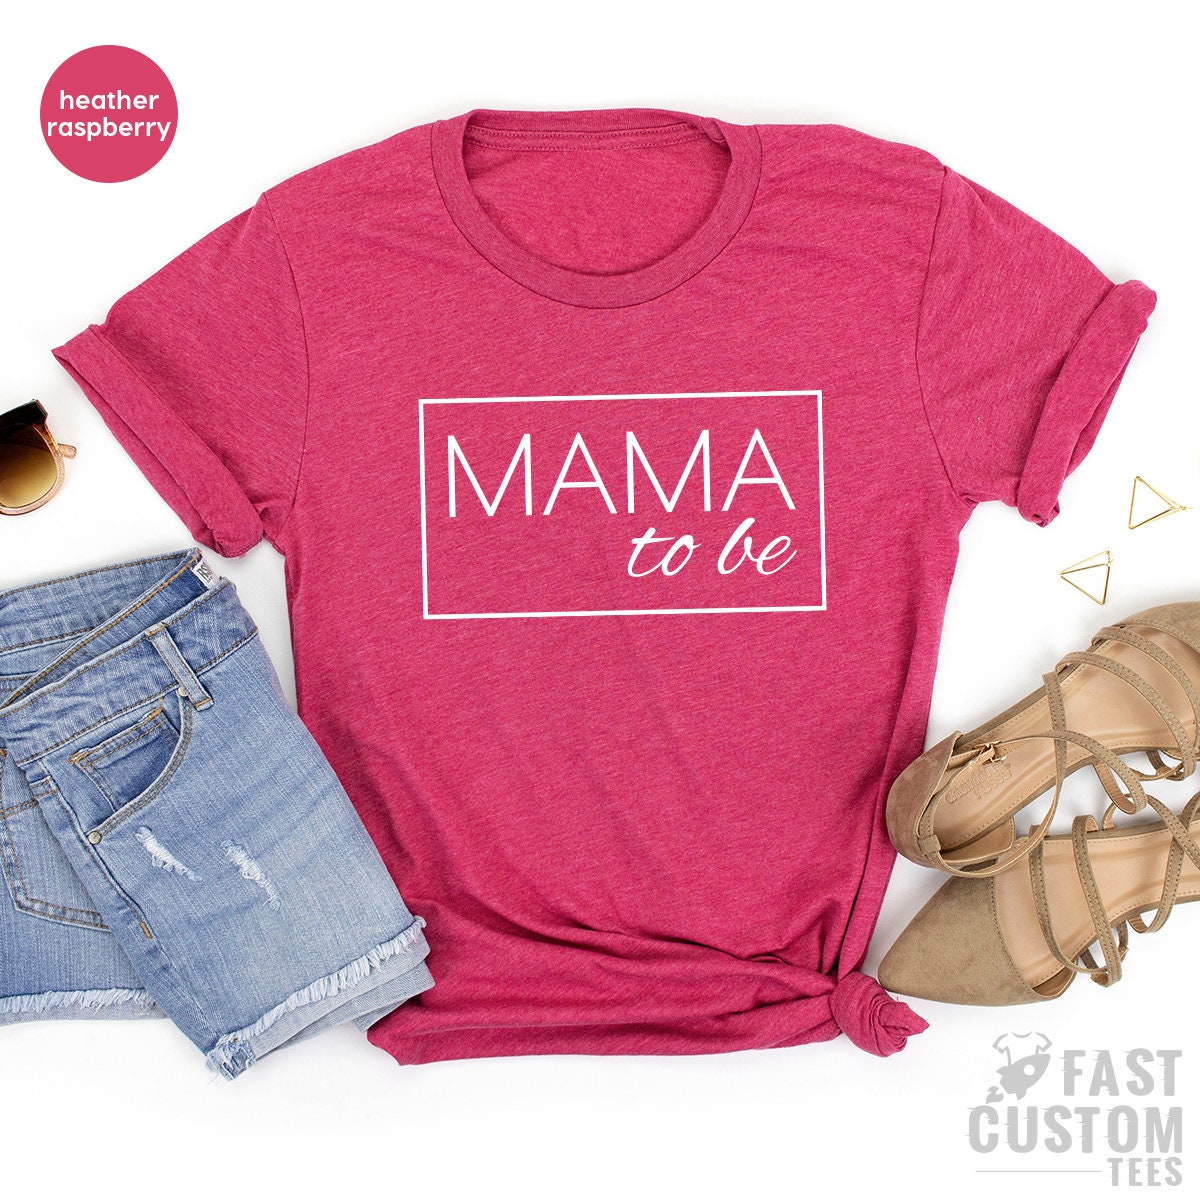 Mama To Be Shirt, Baby Announcement Tee, Gift For New Mom, First Mothers Day,  New Mommy Gifts, Pregnancy Reveal, Mom To Be Shirt - Fastdeliverytees.com